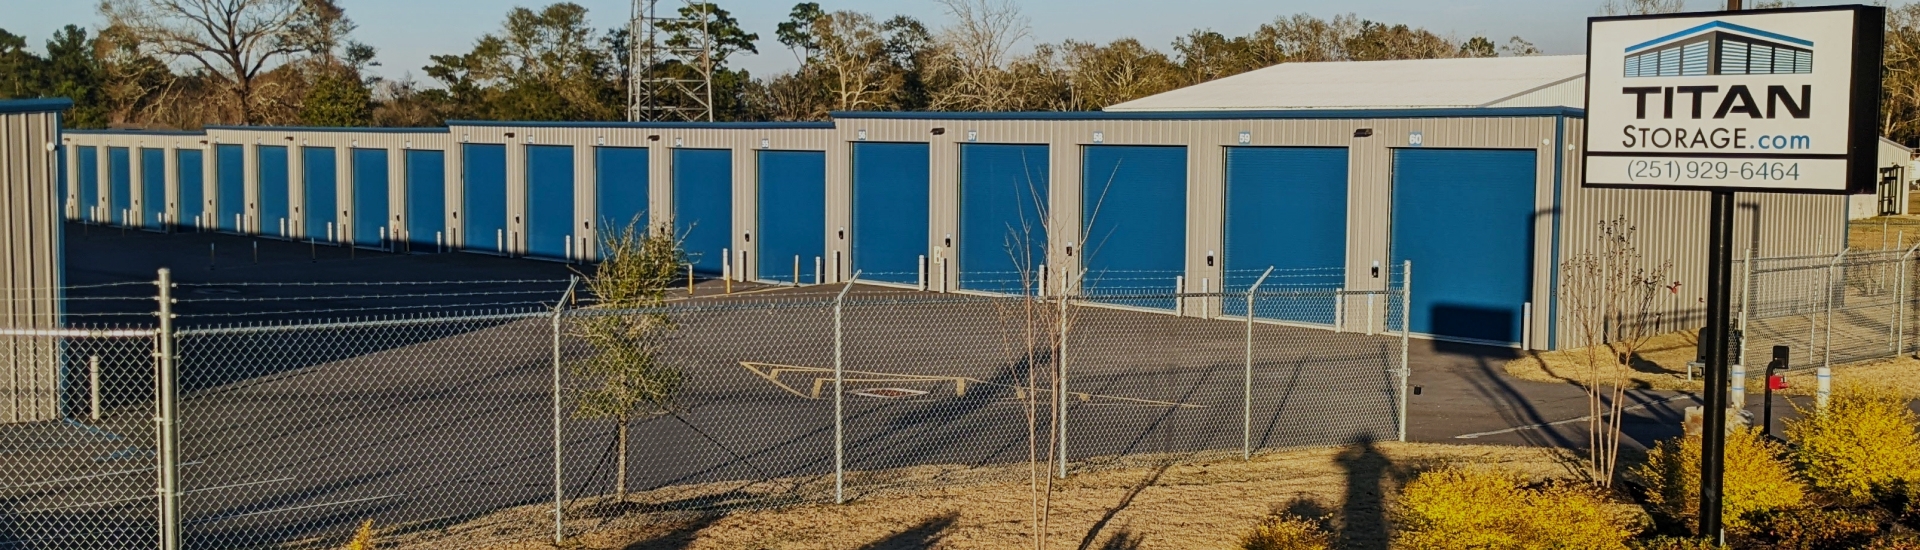 Enter Titan Storage Fairhope through the wide gate and down the extra wide driveway to your unit.